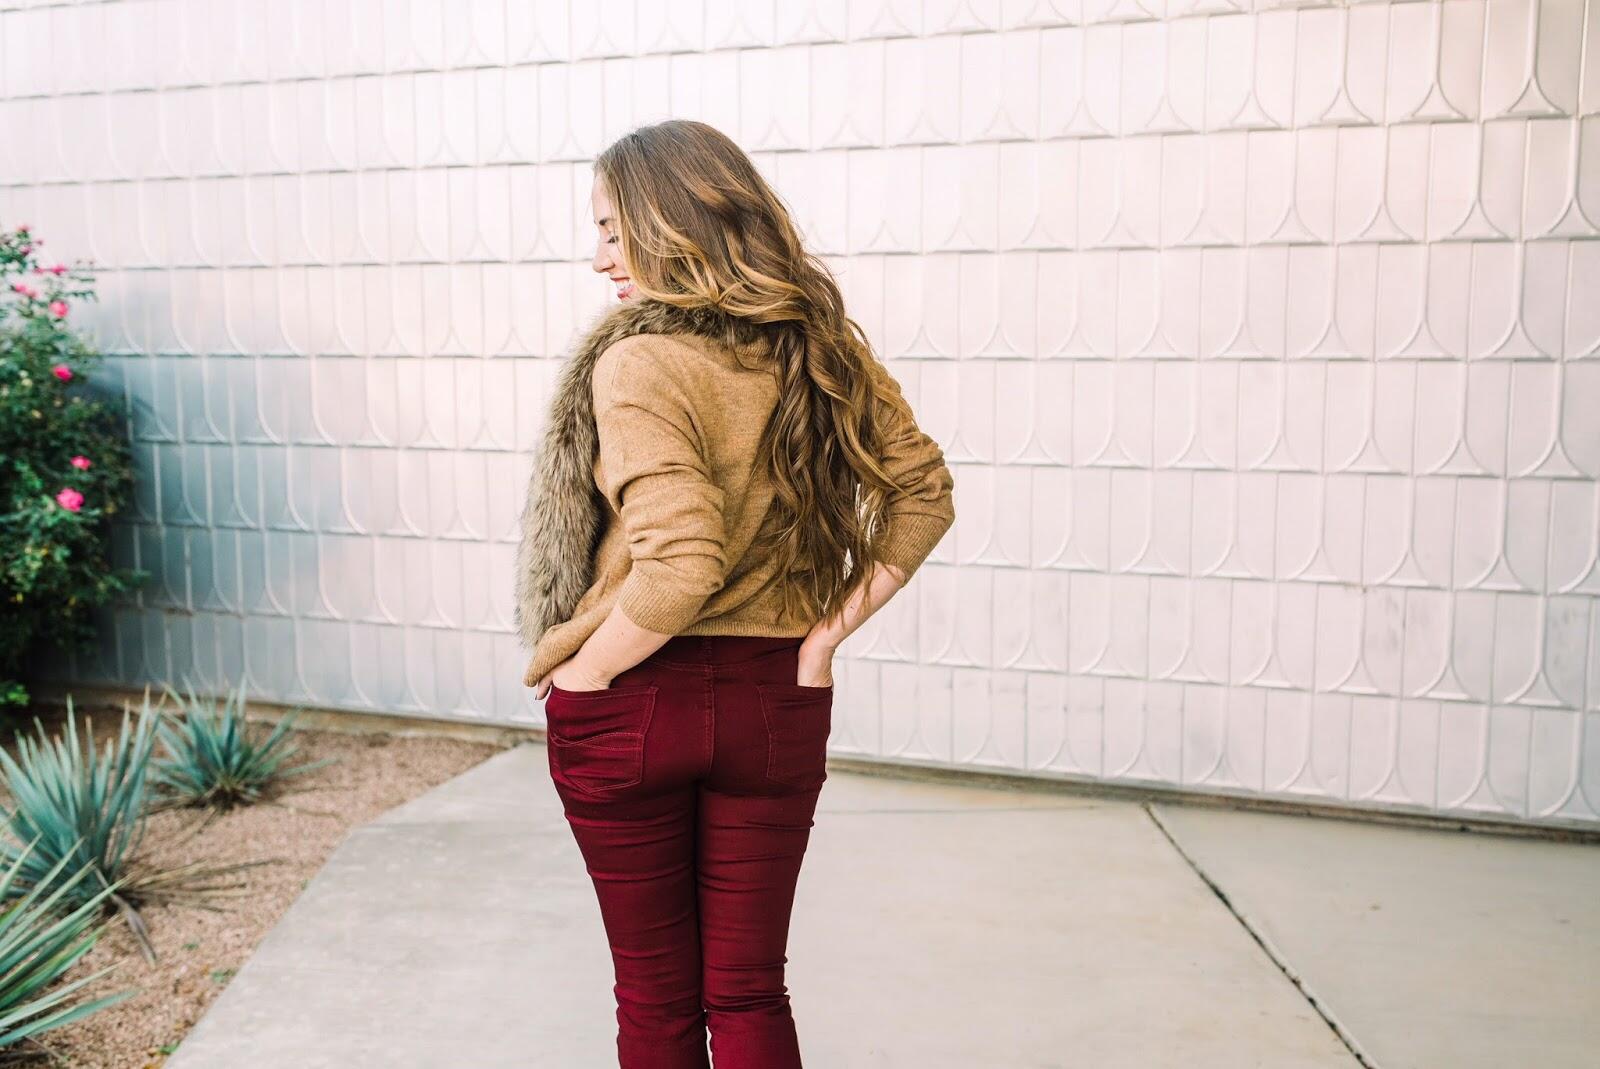 How to Wear Colored Jeans This Fall by East Memphis fashion blogger Walking in Memphis in High Heels